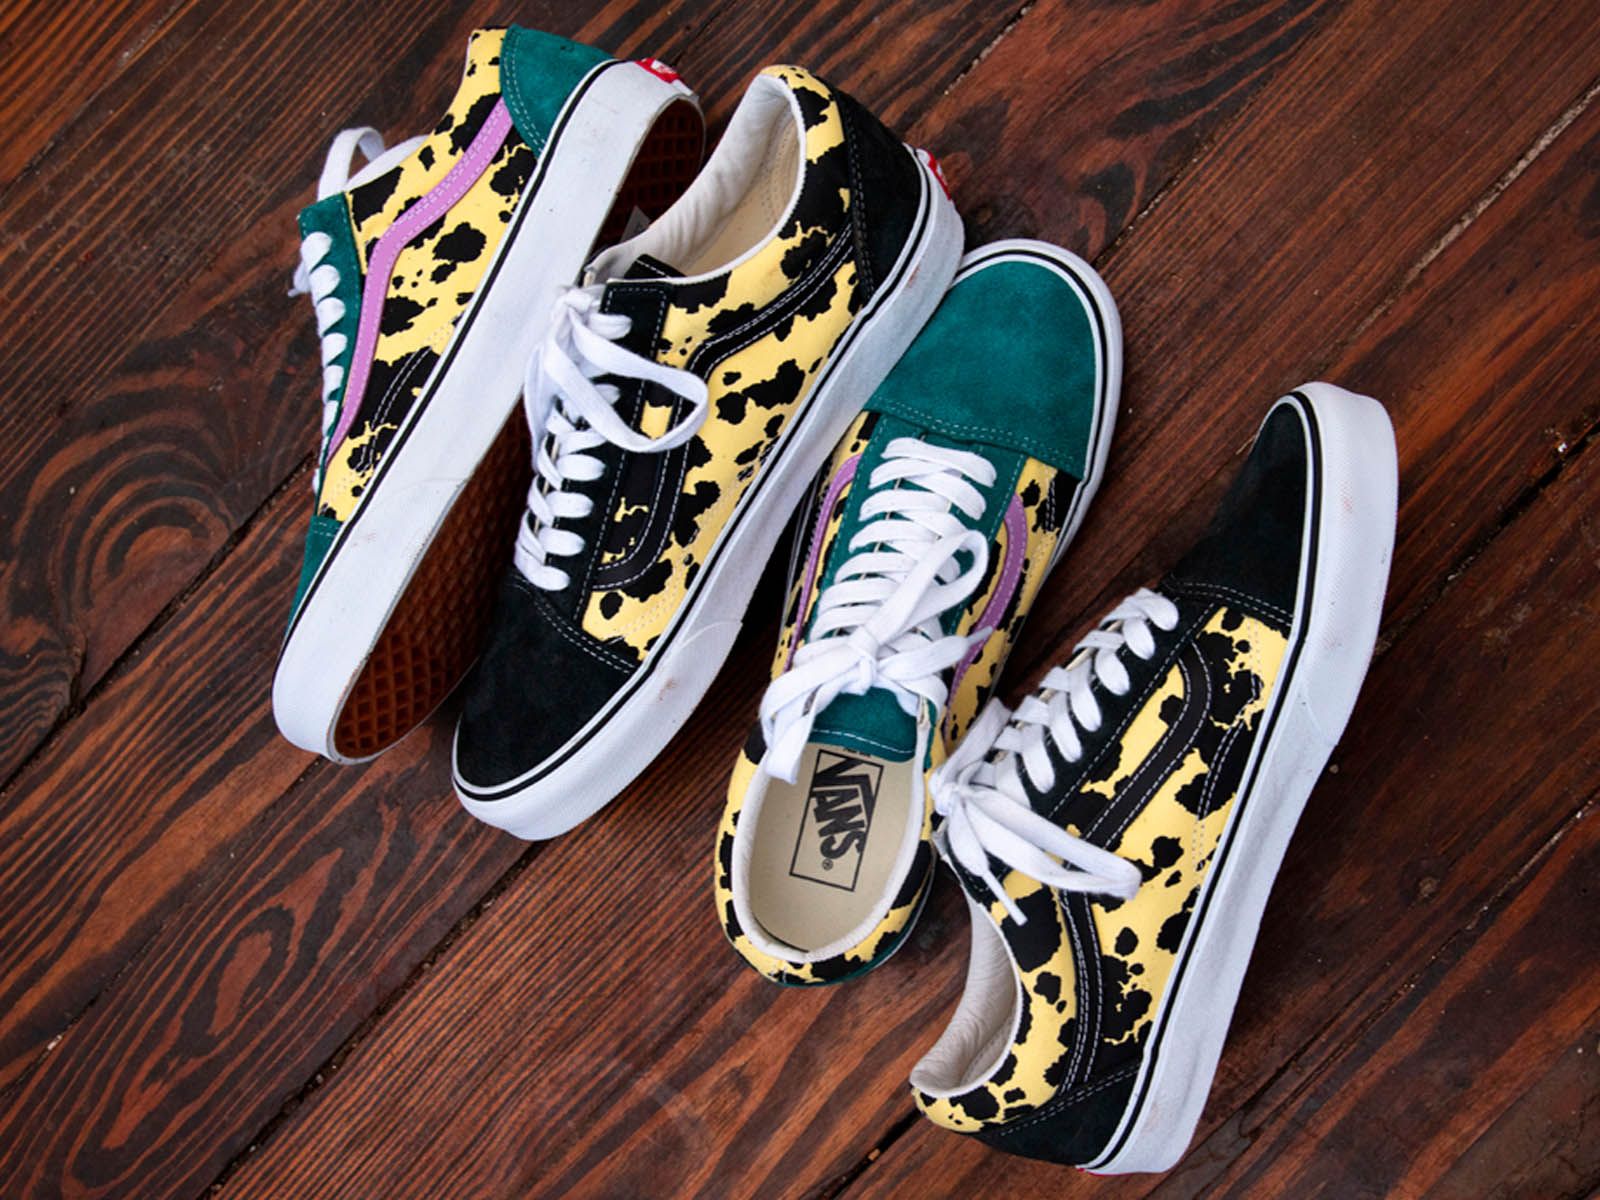 Awake NY x Vans Old Skool: an ode to skateboard culture